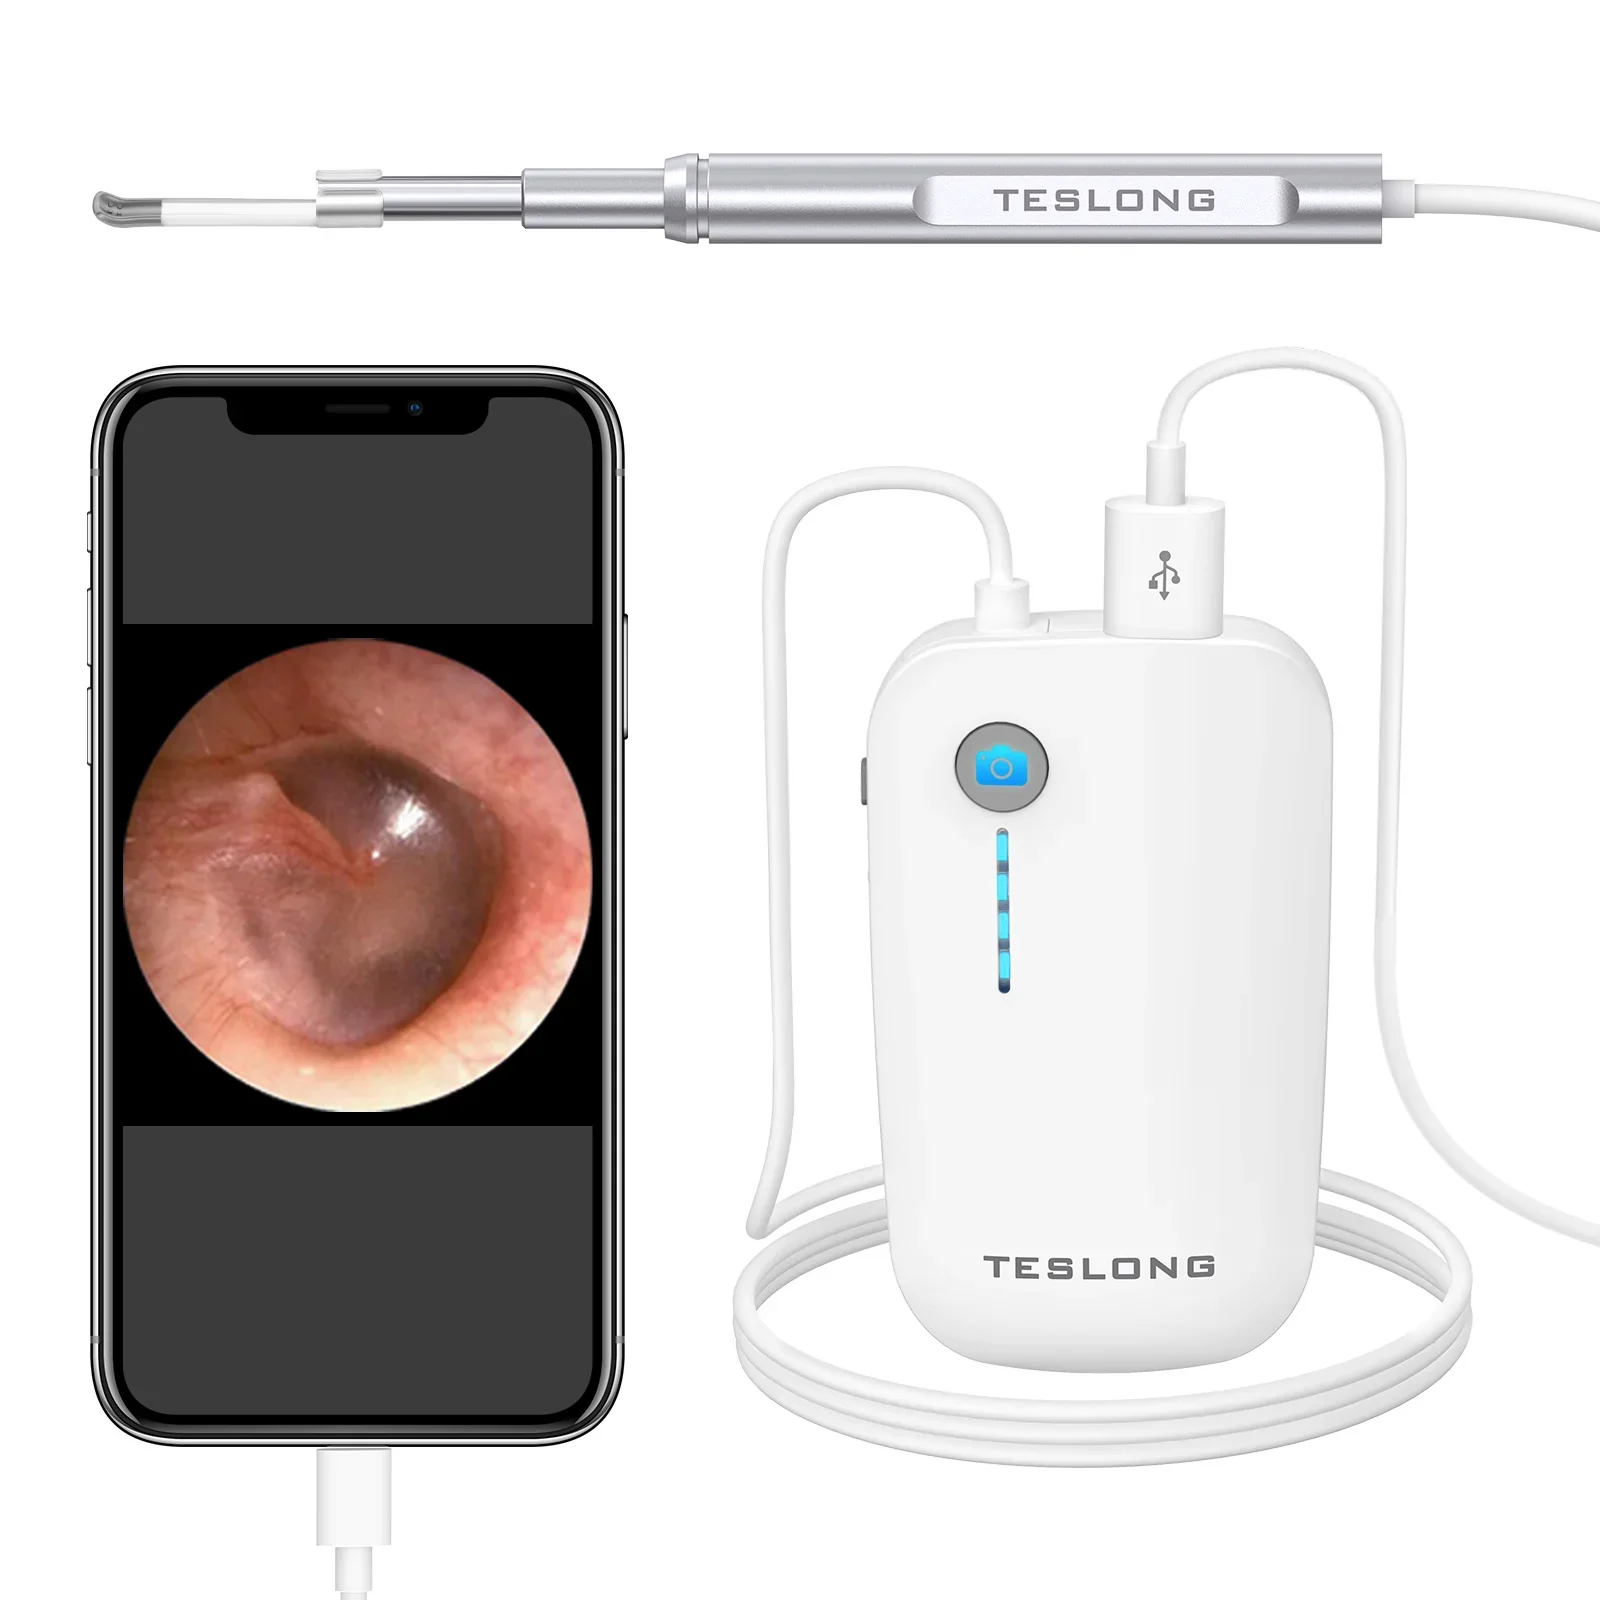 

Teslong-NTE100I Digital Ear Camera for iPhone and Android Compatible, WAX Removal and WAX, iPhone and Android Compatible